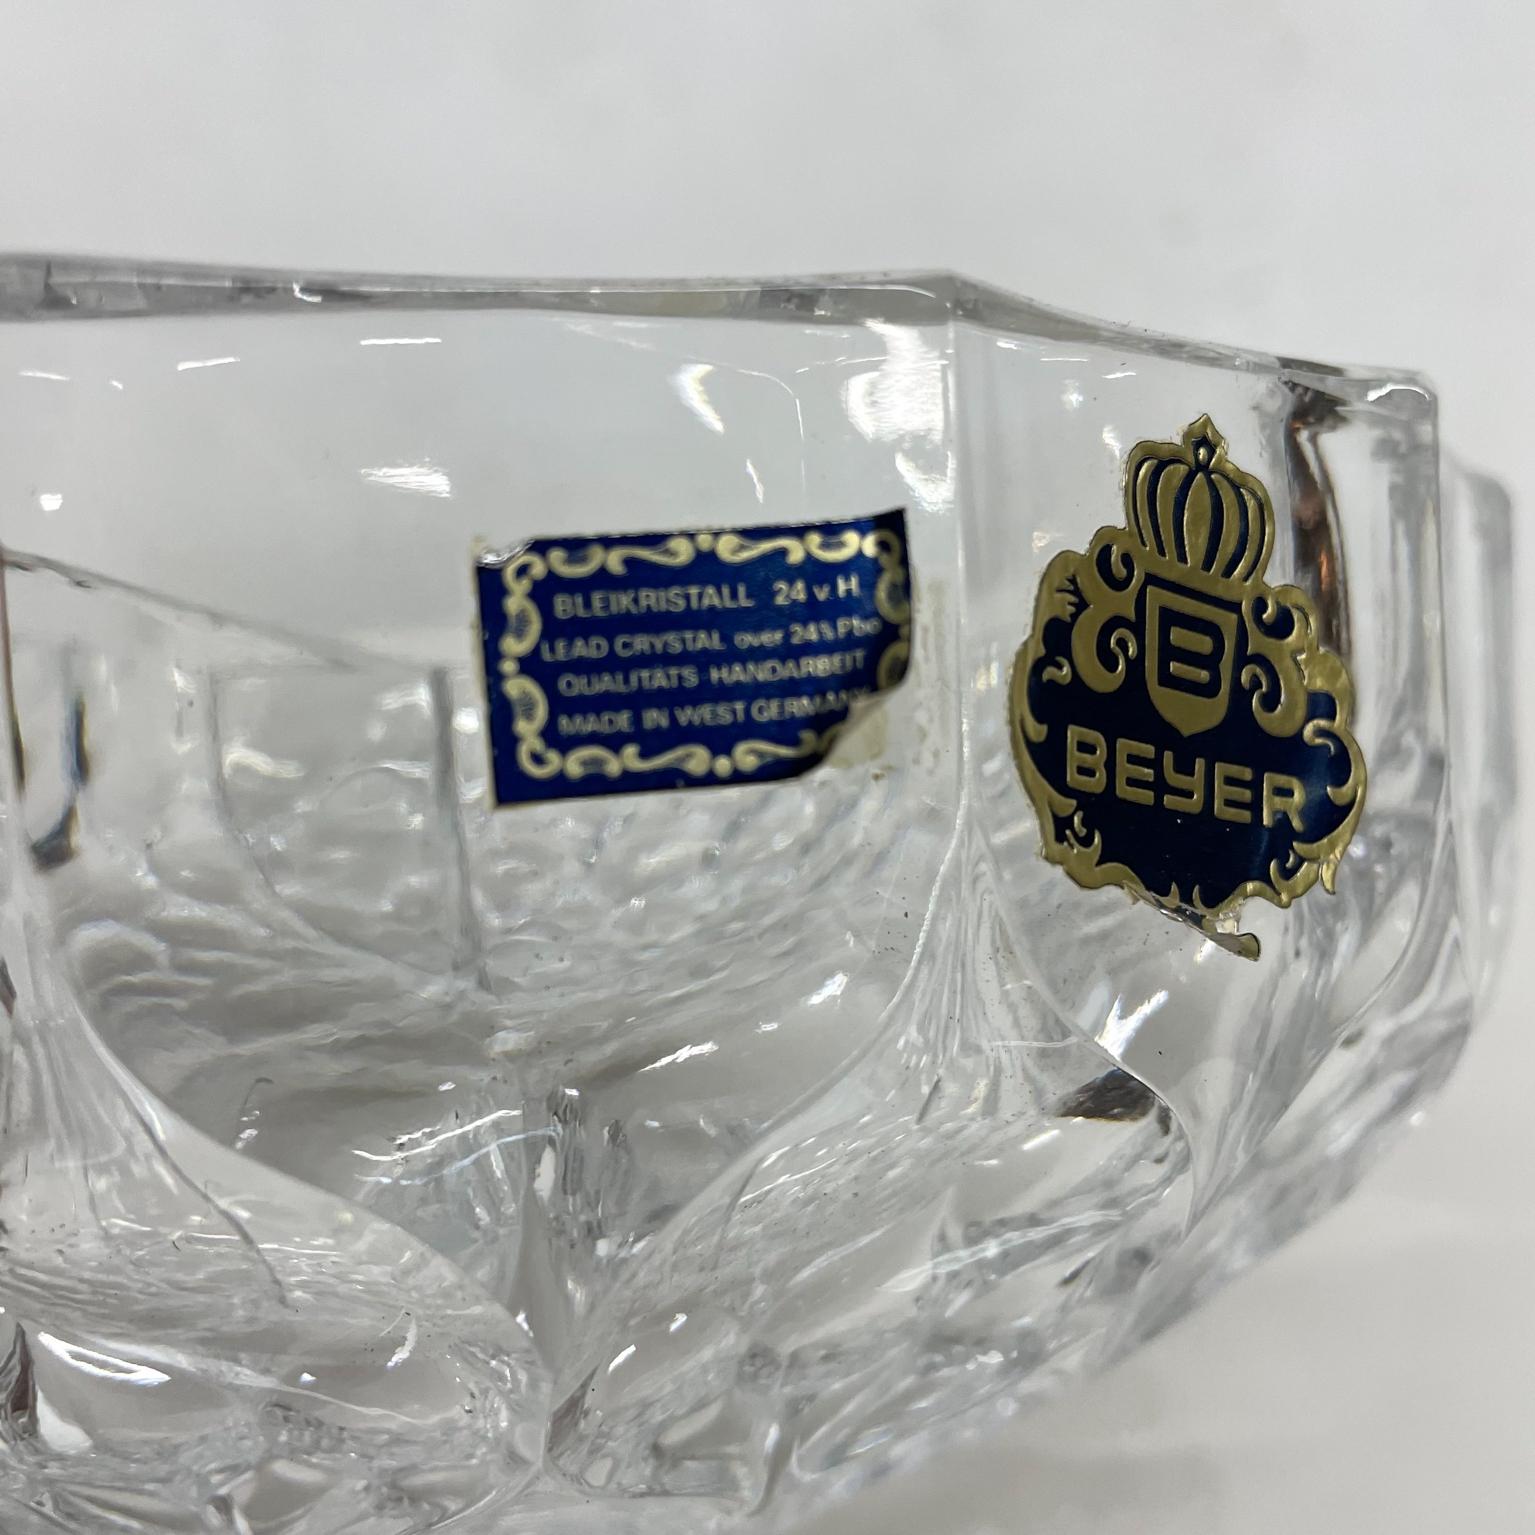 Glass Beyer Bleikristall Crystal Bowl Sectioned Serving Dish West Germany, 1950s